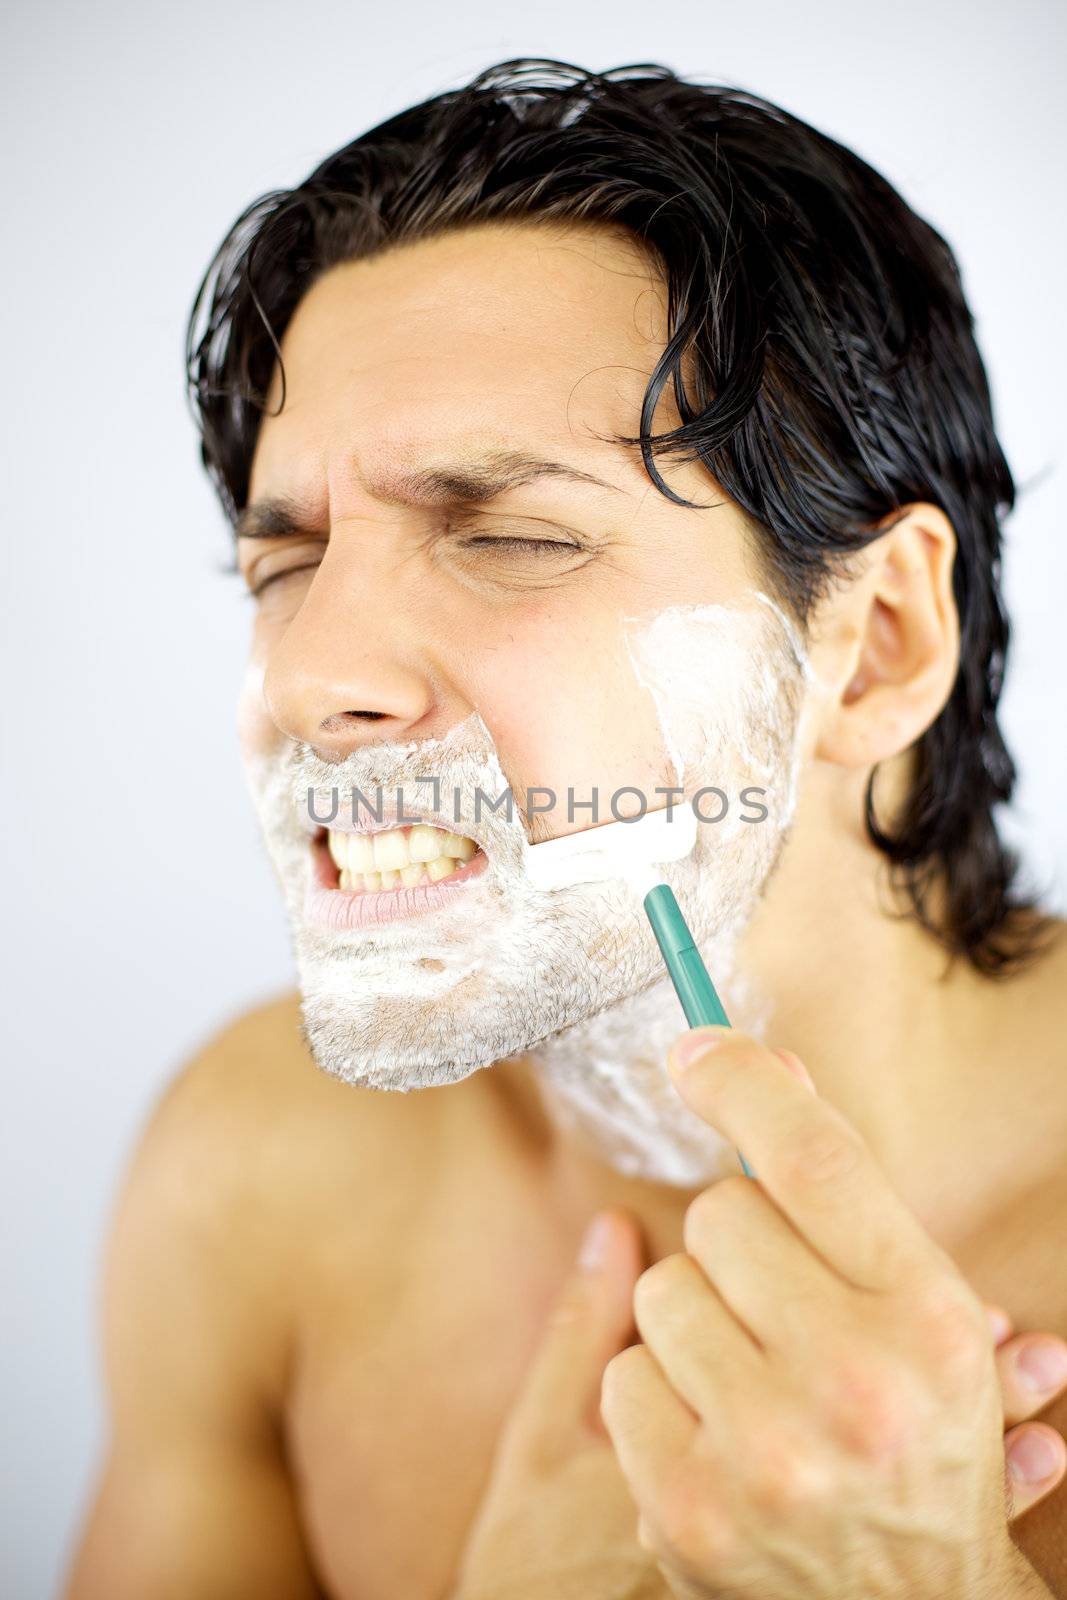 Young man hurting himself shaving with blade by fmarsicano